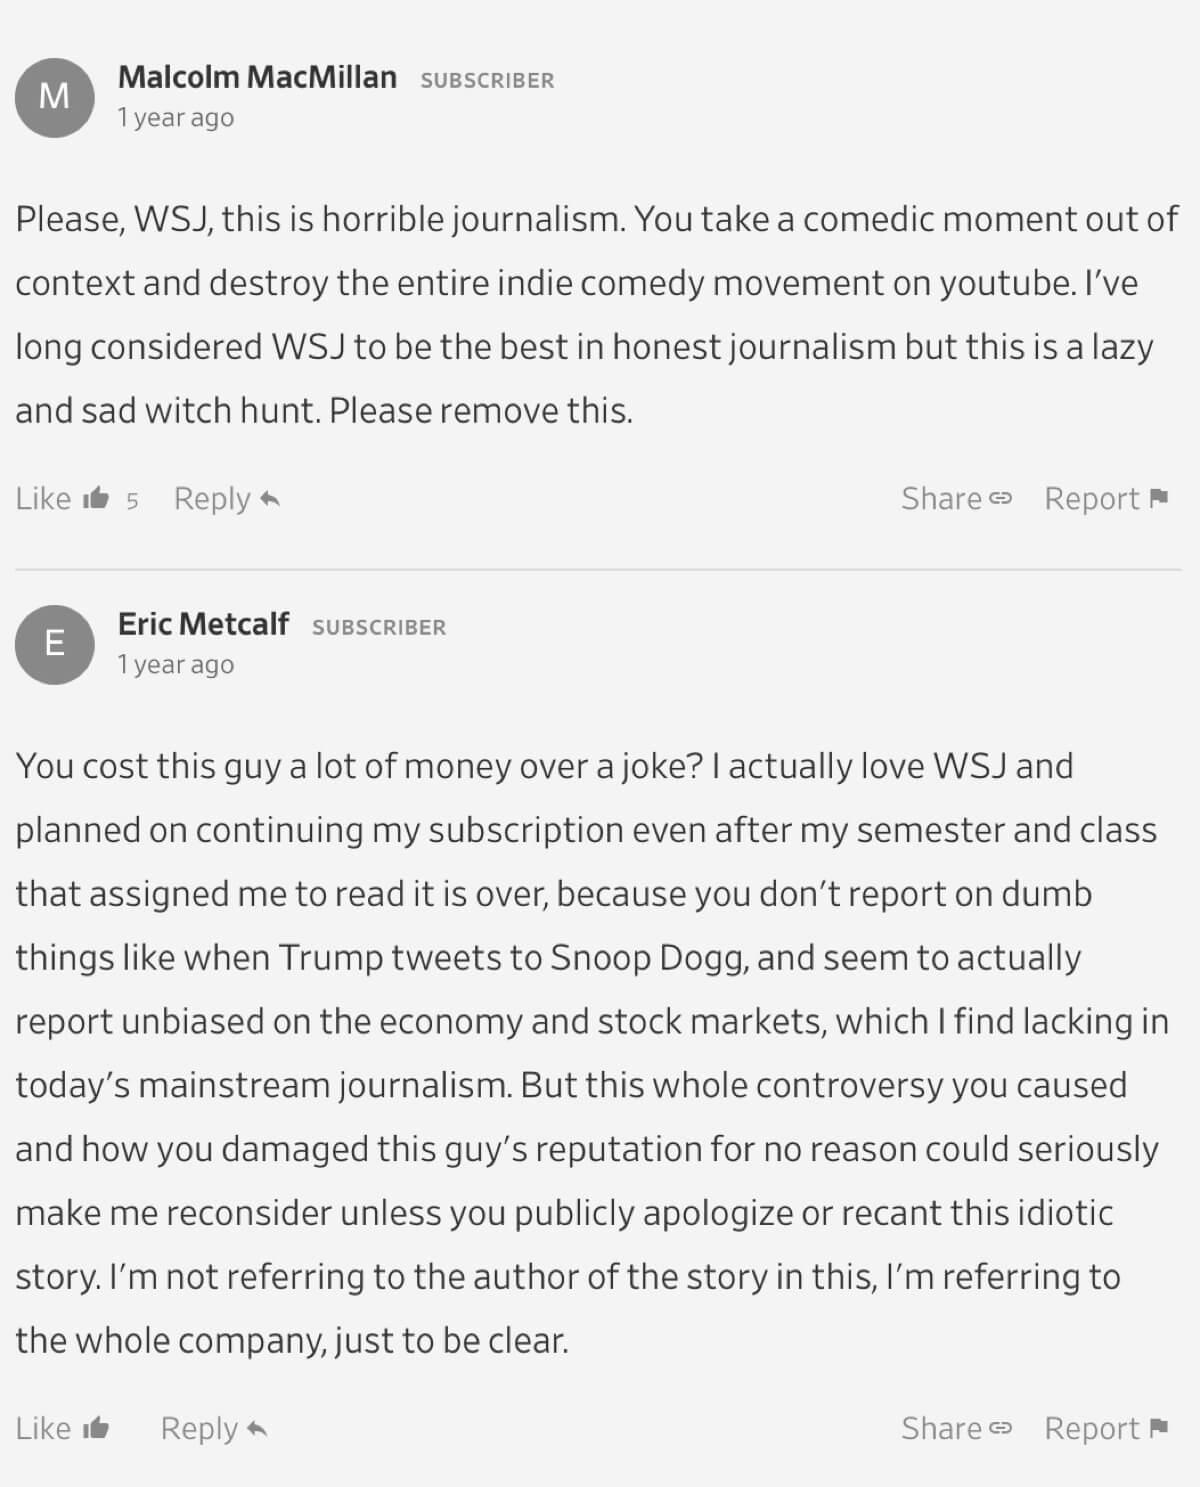 A critical comment on The Wall Street Journal's article about PewDiePie.